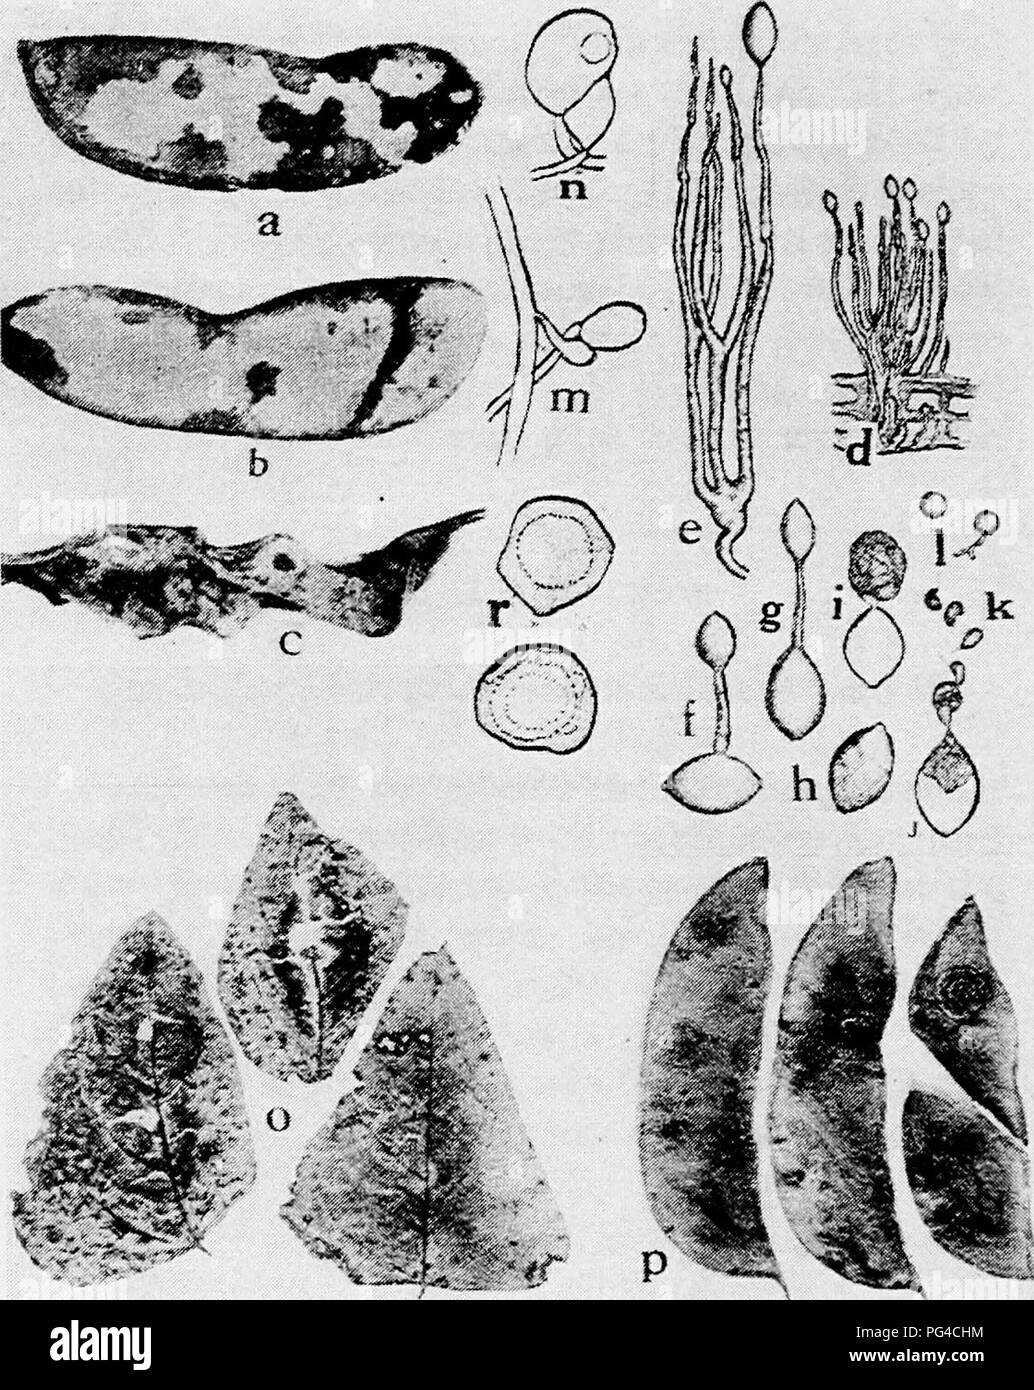 . Diseases of truck crops and their control . Vegetables. Fig. 48. Diseases of Lima Bean. a. h. c. different stages of downy mildew on pods, d. tuft of conidiophores and conidia of Phythophthora phaseoli, e. same as d. but greatly enlarged, /. g. conidia germinating by means of a germ tube, h. i. j. k. germination of conidia by means of zoospores, /. germinating zoospores (d. to I. after Thaxter), m. «. fertilization of the oogonium by the anthendium, o. Phoma blight on foliage, p. Phoma blight on pods {0. and p. after Halsted), r. mature oospores of P. phaseoli (o. to c, m. n. and r. after Cl Stock Photo